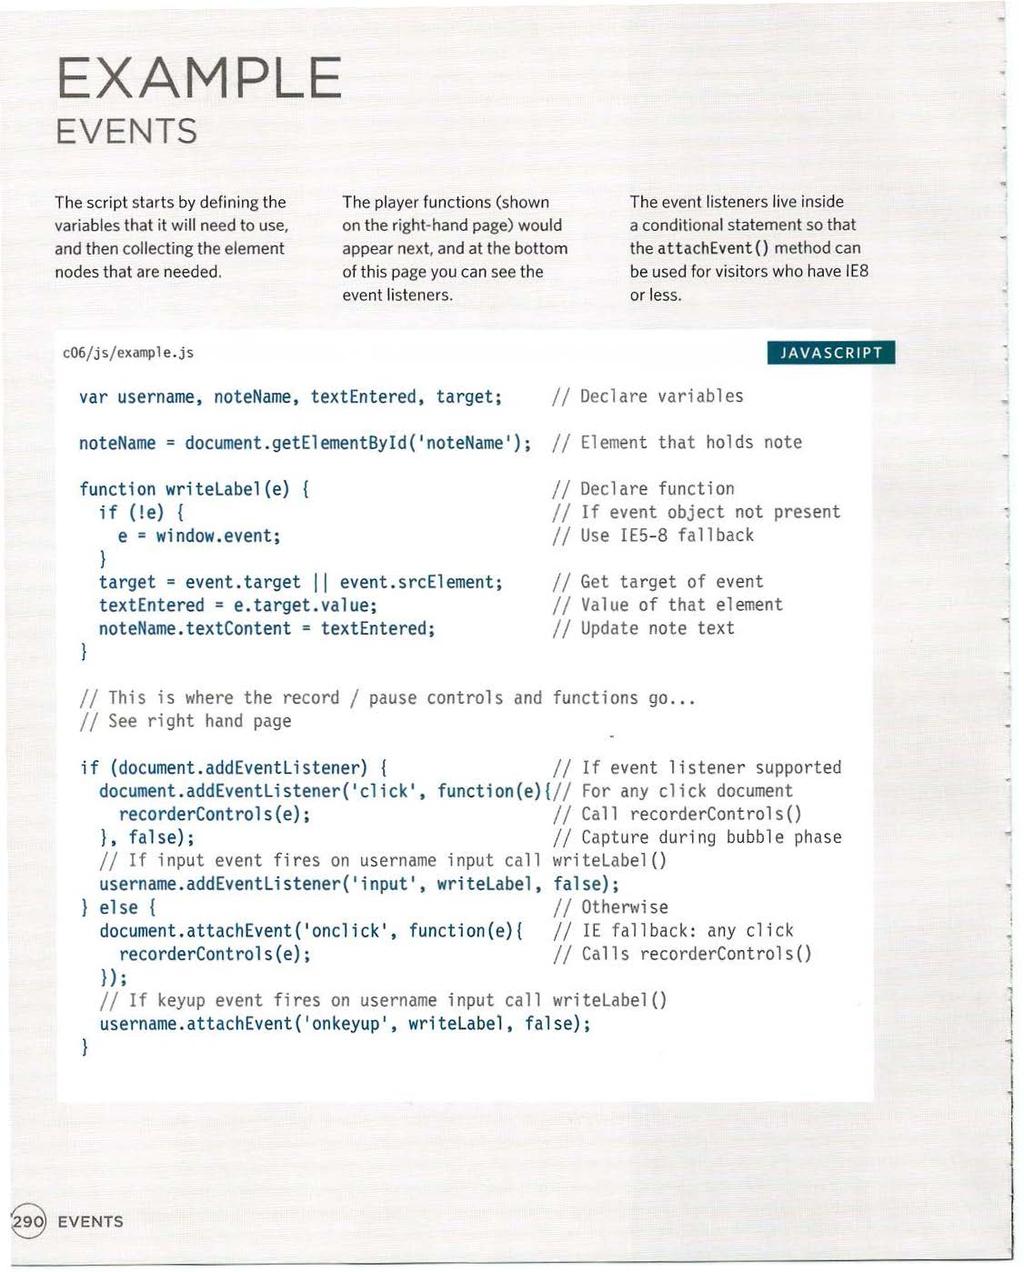 EXAMPLE EVENTS The script starts by defining the variables that it will need to use, and then collecting the element nodes that are needed.